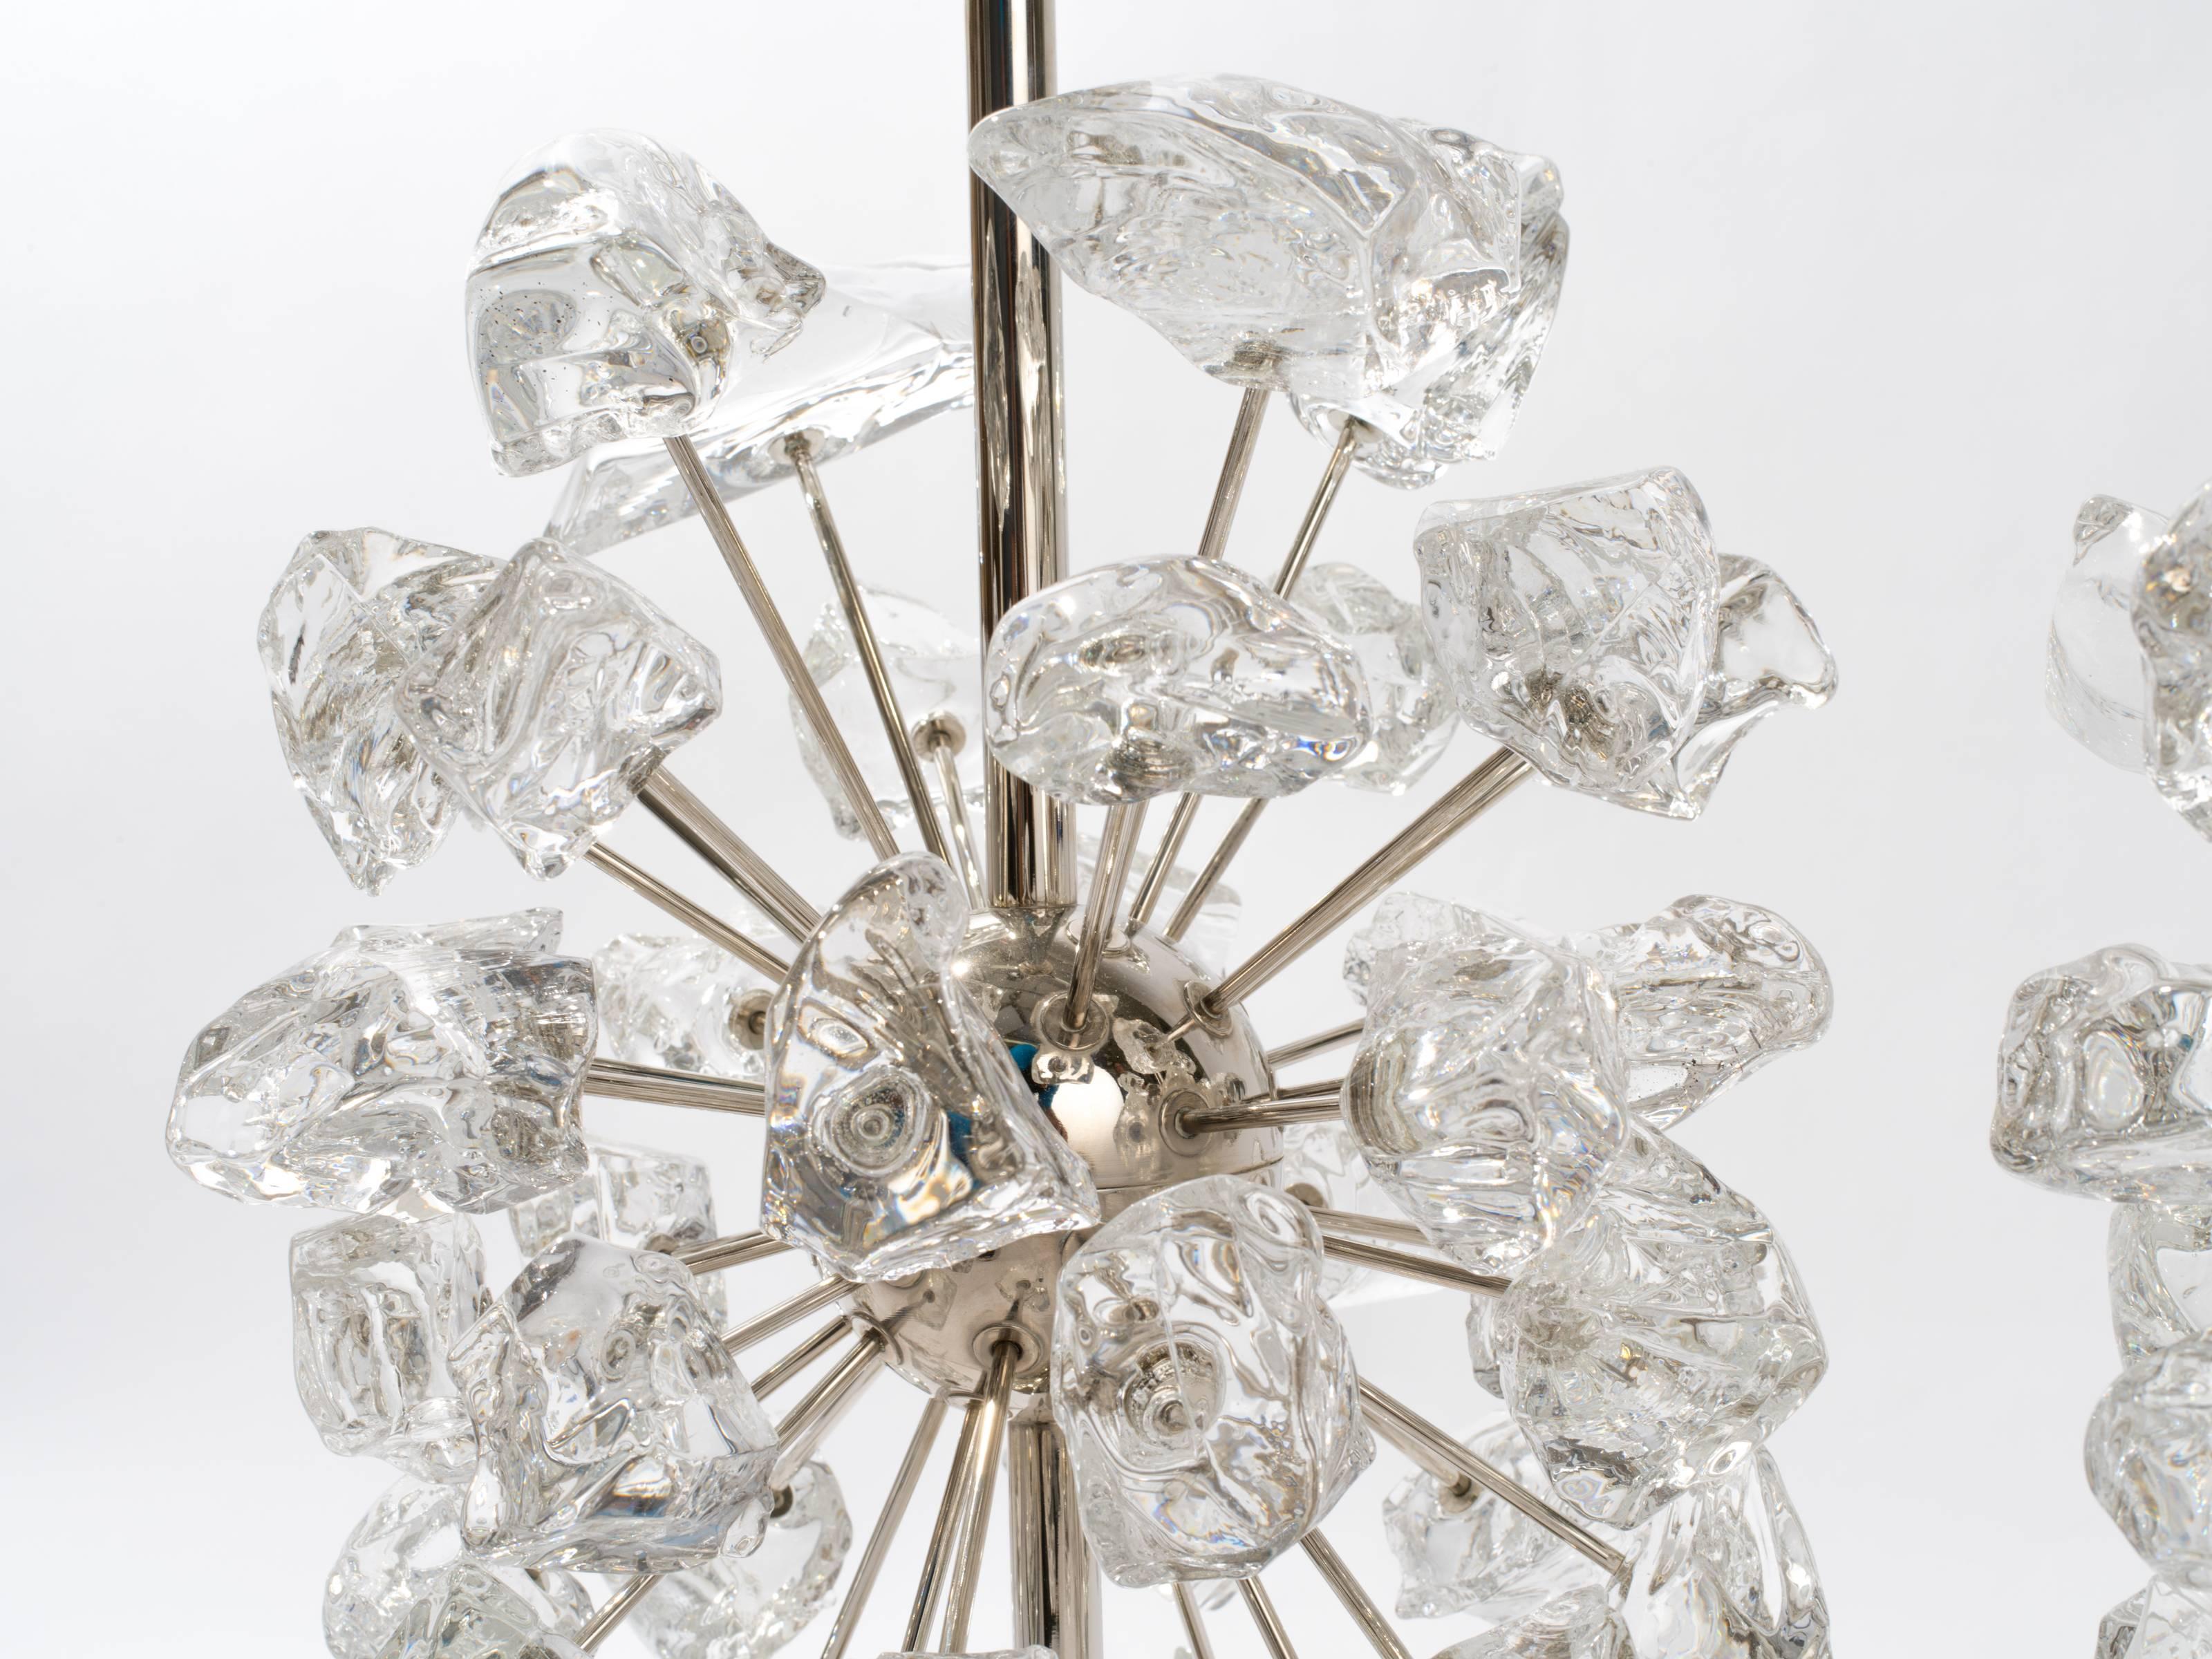 Expansion Clear Glass Rocks Lamps 1